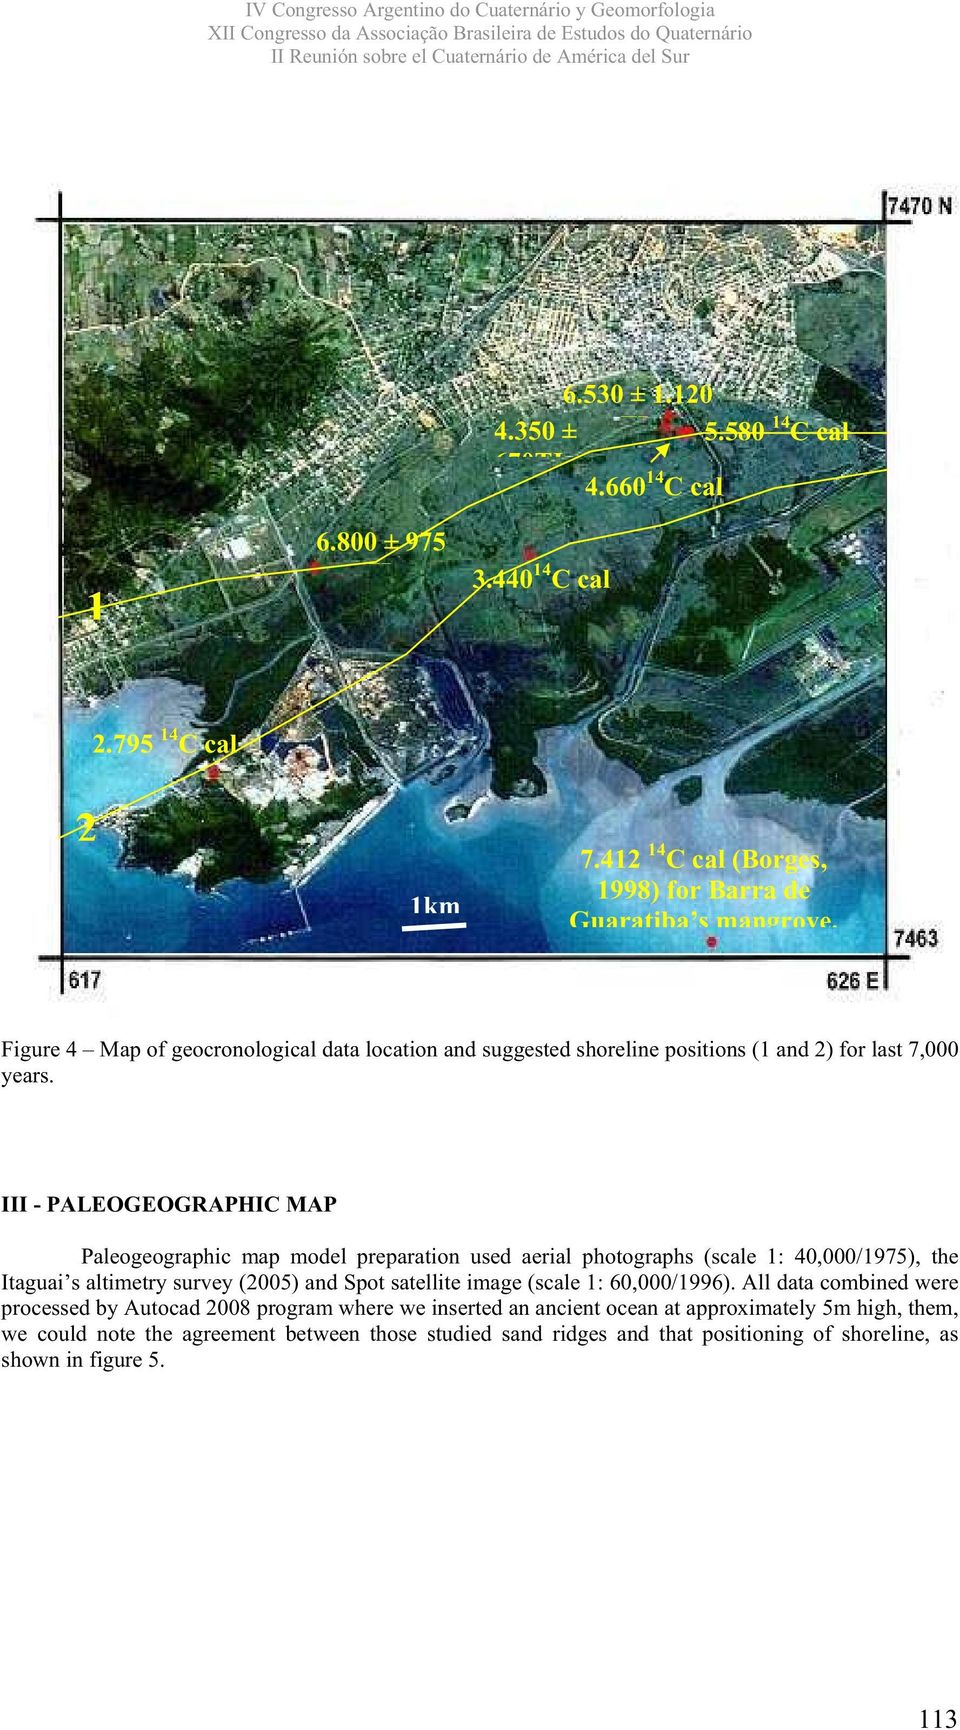 III - PALEOGEOGRAPHIC MAP Paleogeographic map model preparation used aerial photographs (scale 1: 40,000/1975), the Itaguai s altimetry survey (2005) and Spot satellite image (scale